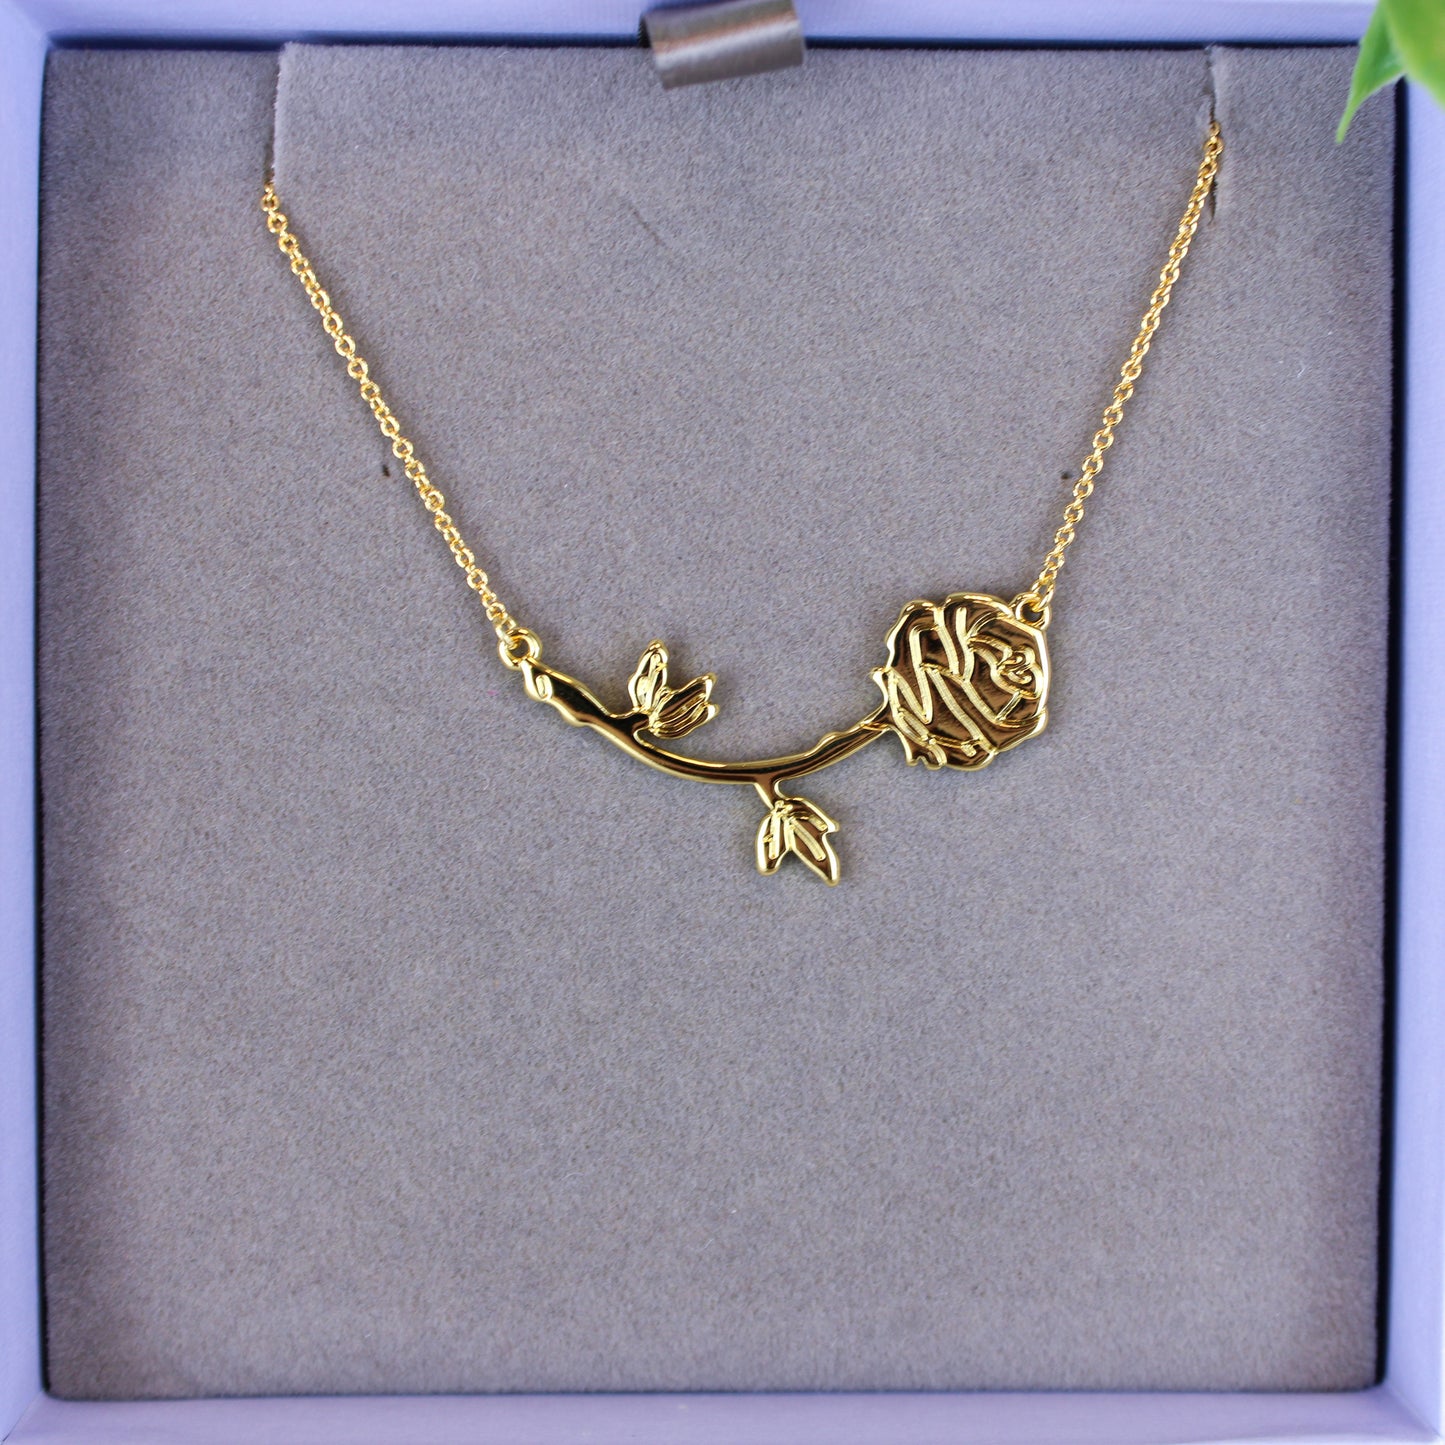 Enchanted Rose Beauty and the Beast Gold Necklace